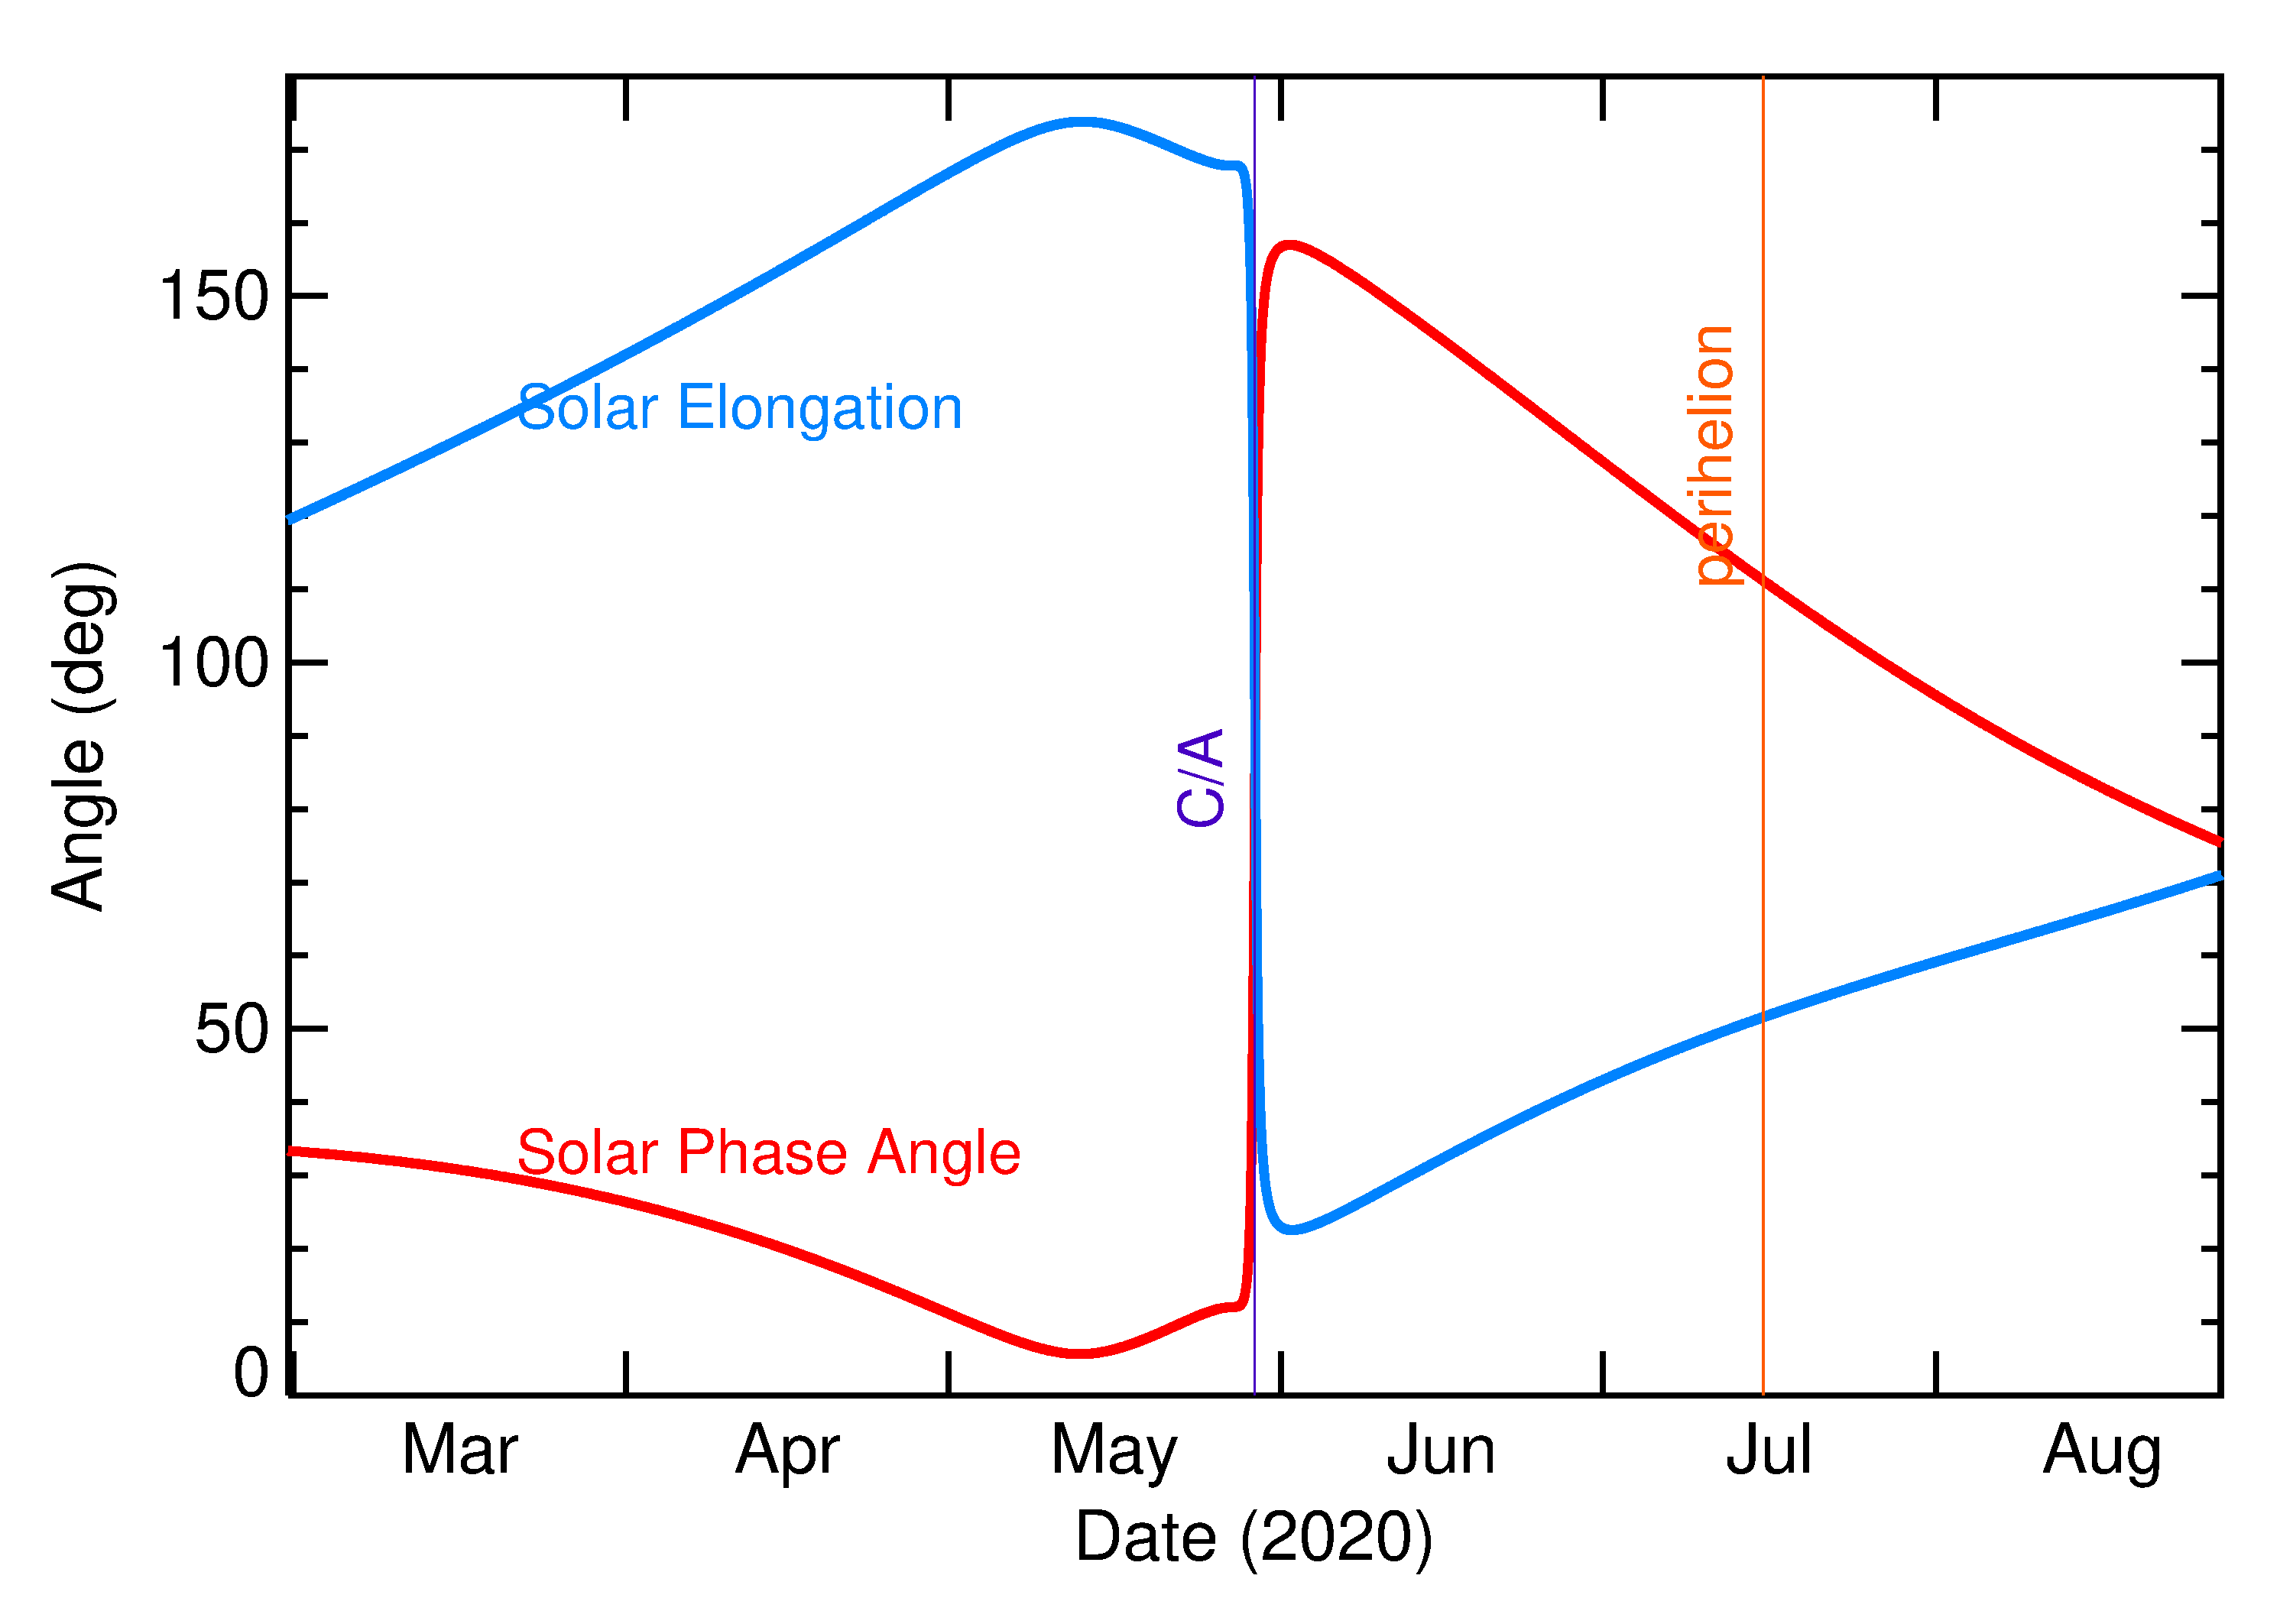 Solar Elongation and Solar Phase Angle of 2020 KF5 in the months around closest approach